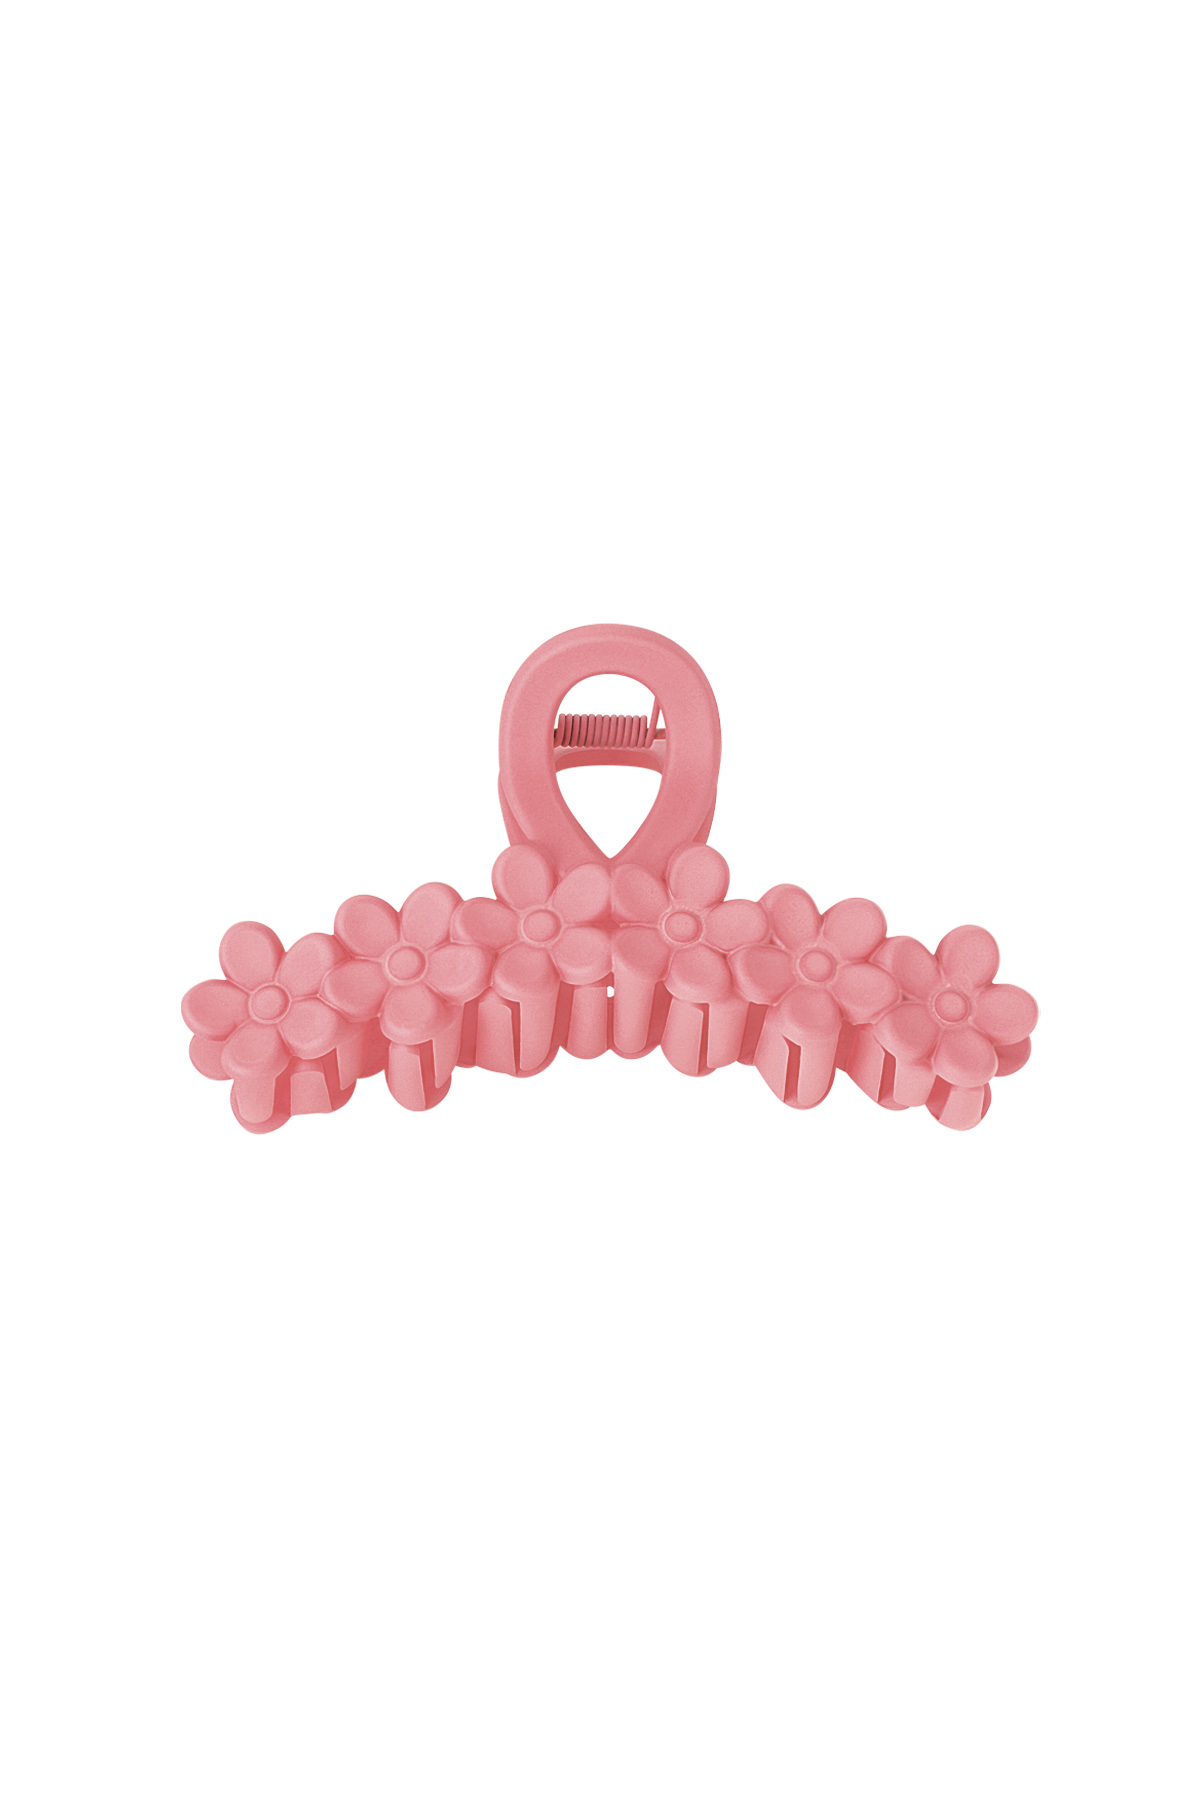 Hair clip flowers in a row - pink Plastic h5 